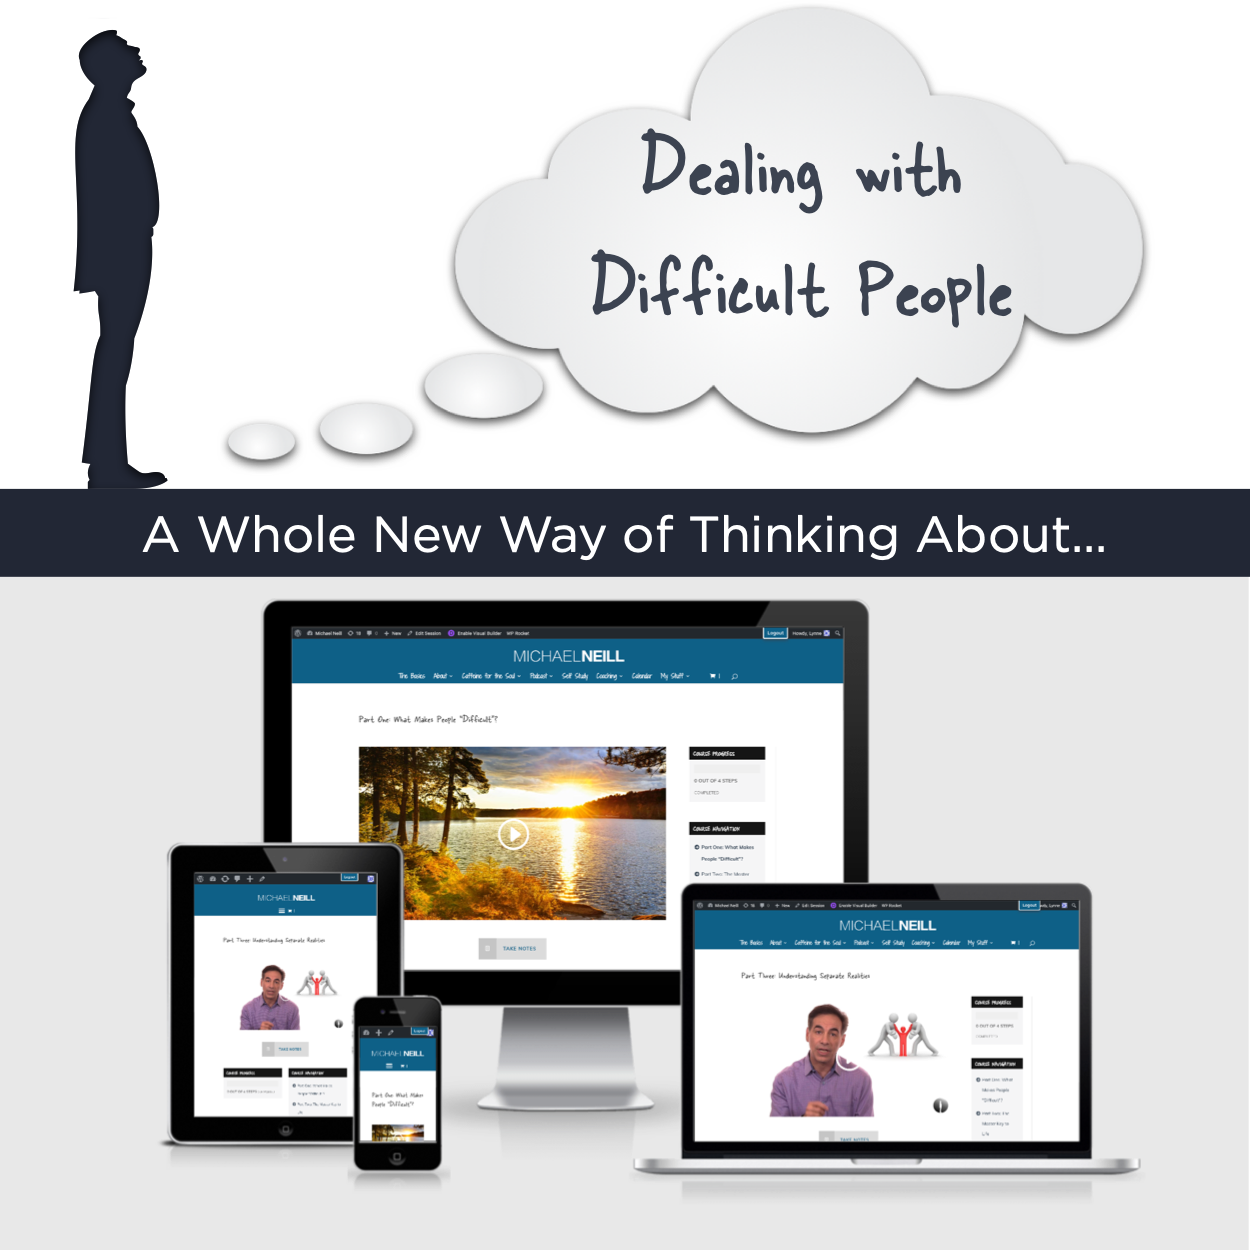 Michael Neill - A Whole New Way of Thinking About Dealing with Difficult People